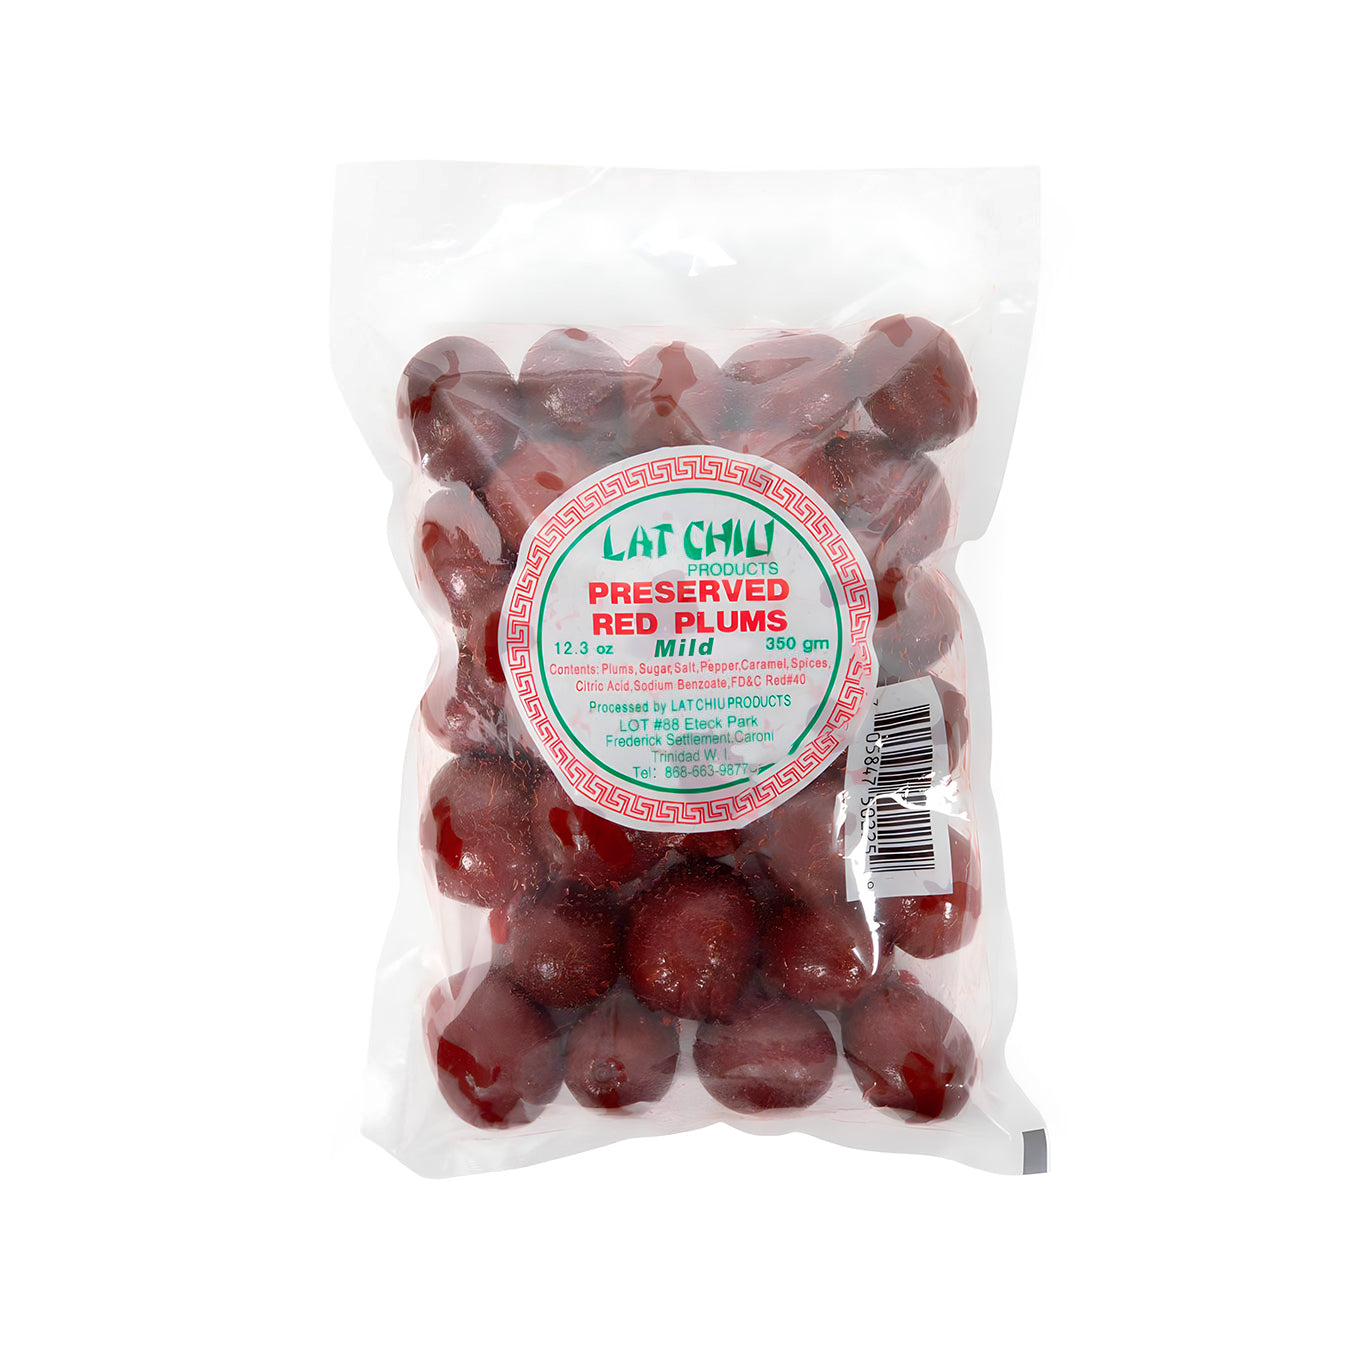 Lat Chiu Products - Preserved Red Plums